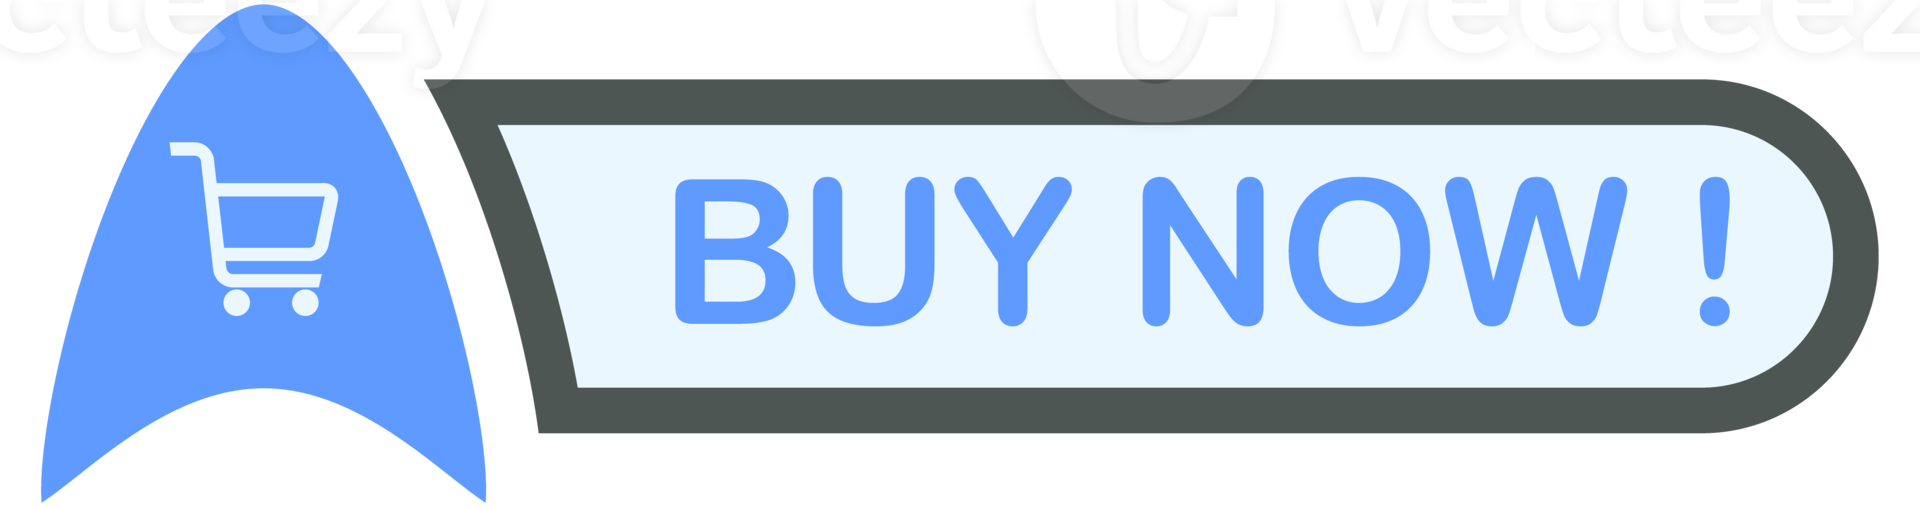 Basic Shape Buy Now Button Label Name Tag png